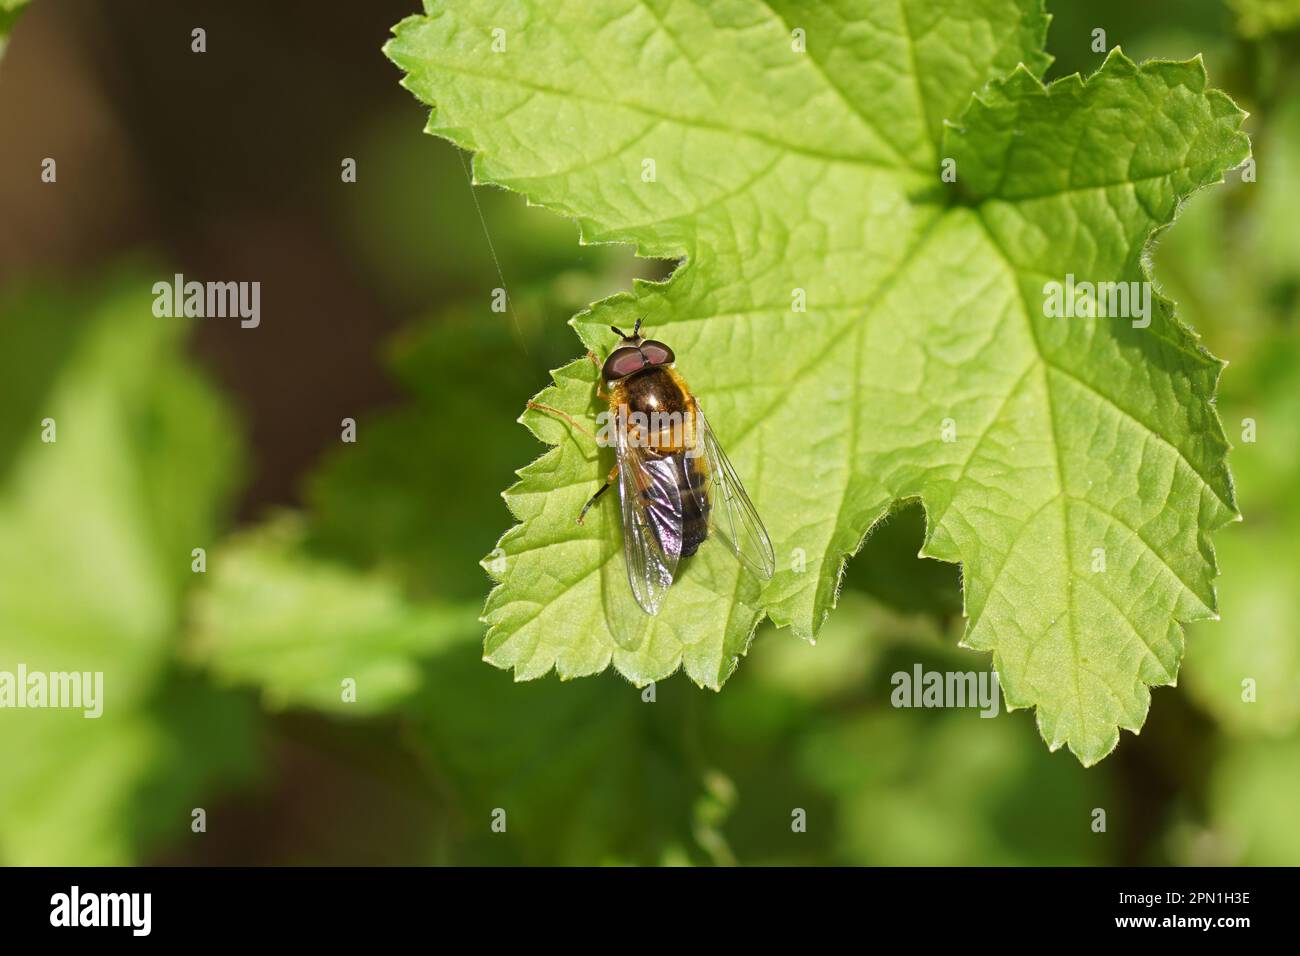 Male hoverfly Epistrophe eligans. On a leaf of a redcurrant in a Dutch garden. Spring, April, Netherlands. Stock Photo